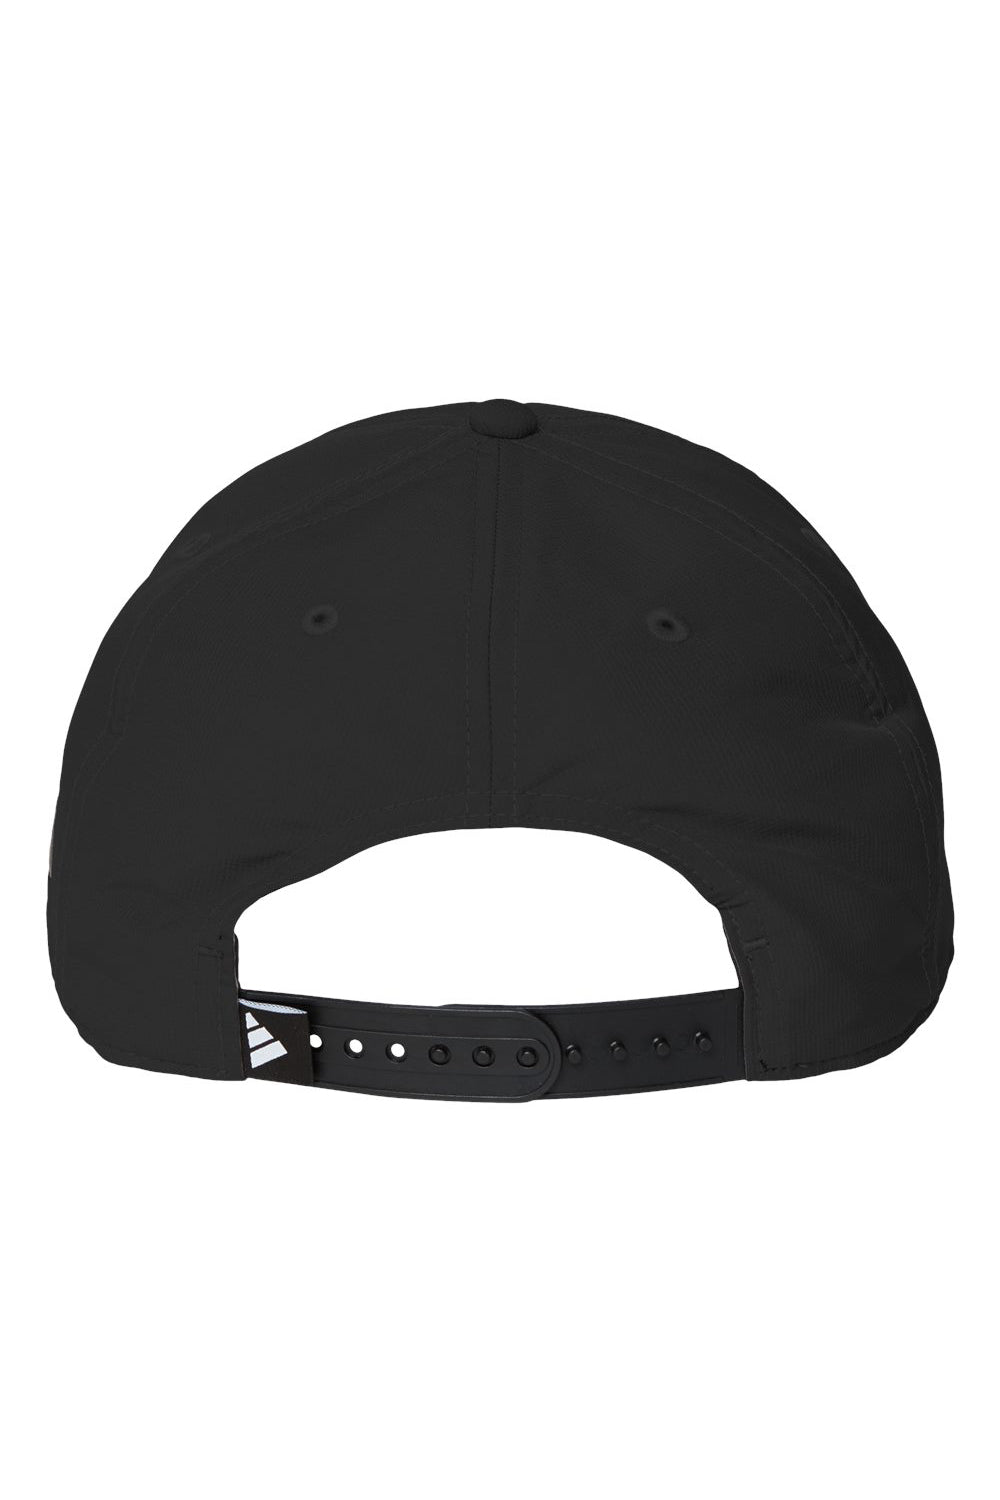 Adidas A605S Mens Sustainable Performance Moisture Wicking Snapback Hat Black Flat Back